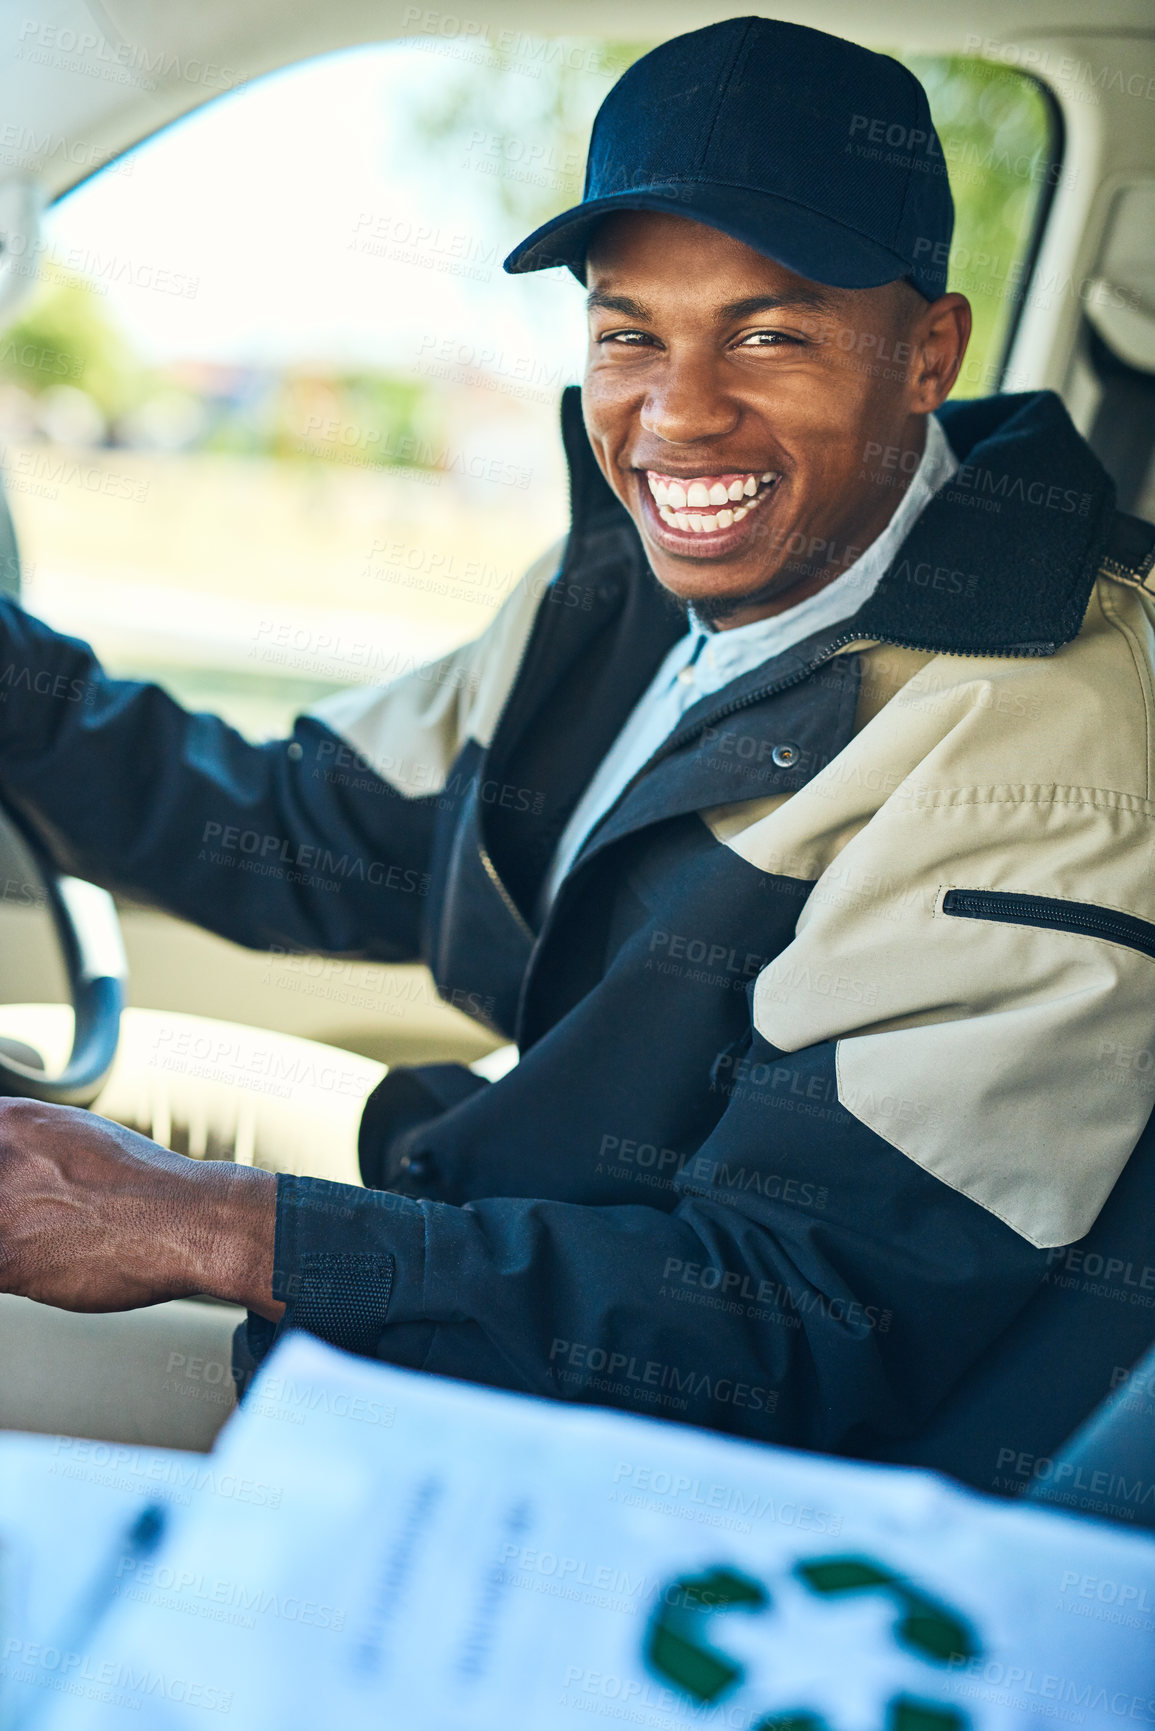 Buy stock photo Delivery, courier driver and portrait of black man for distribution, shipping logistics and transport. Ecommerce, supply chain and happy male worker in car or van to deliver package, order and parcel